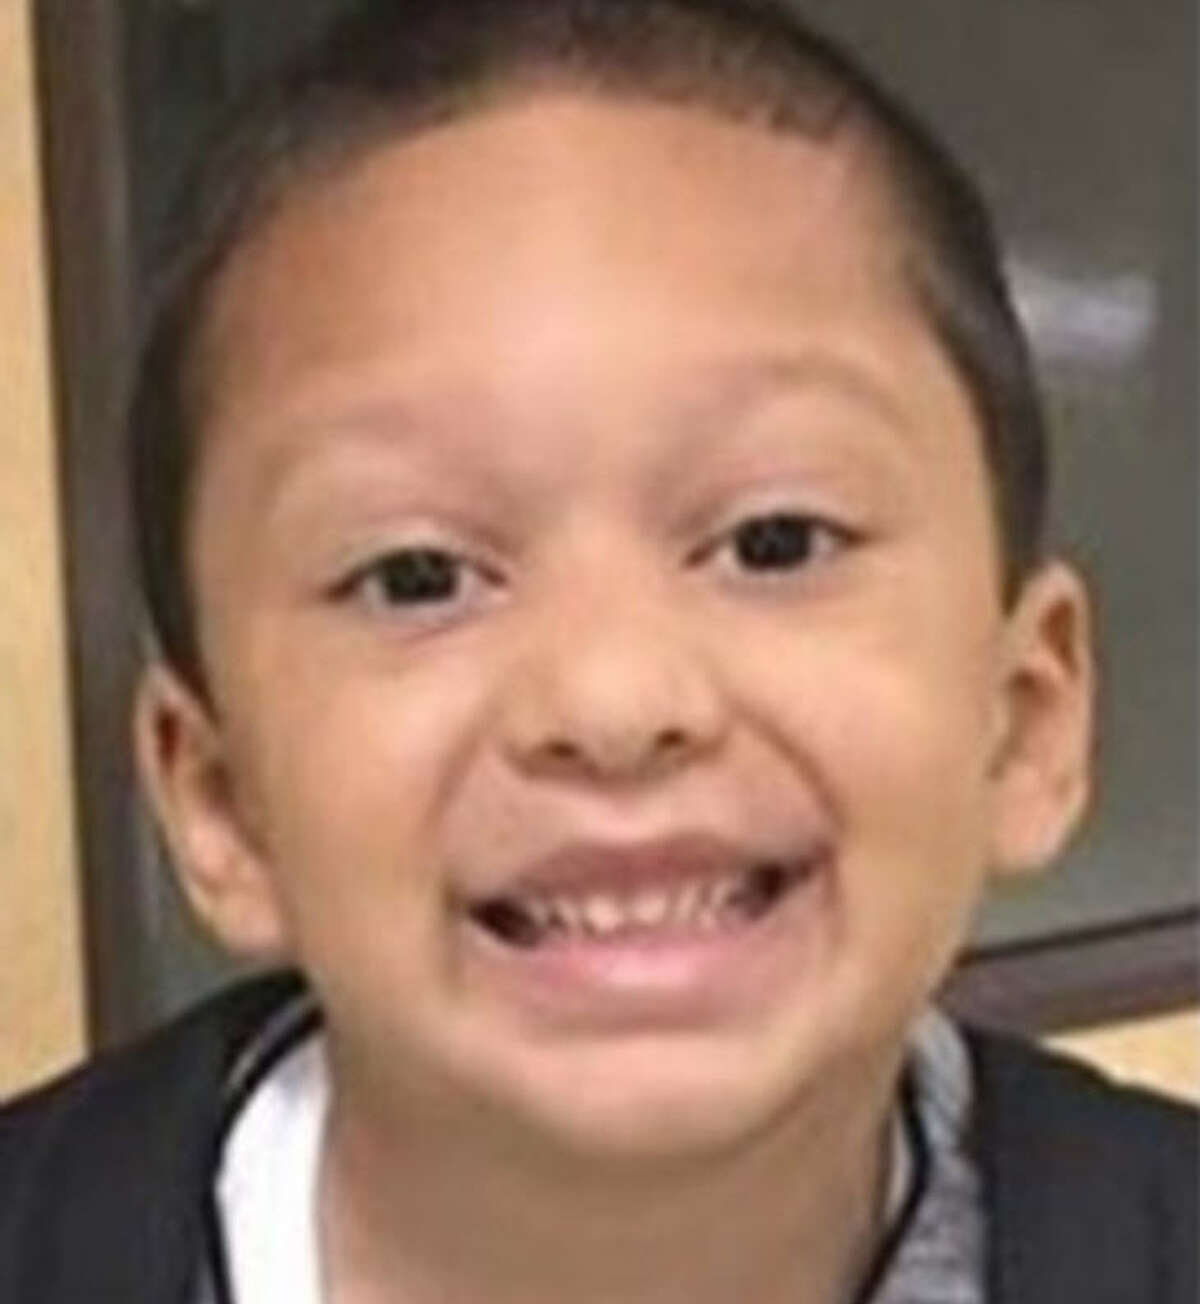 A Central Texas boy vanished in September. Now police want to arrest his mother. Police in Central Texas are looking for 5-year-old Alan Rodriguez, who was last seen Sept. 2, in Cedar Park with his mother, Anais Lechuga. Authorities have a custodial interference warrant out for the mom.